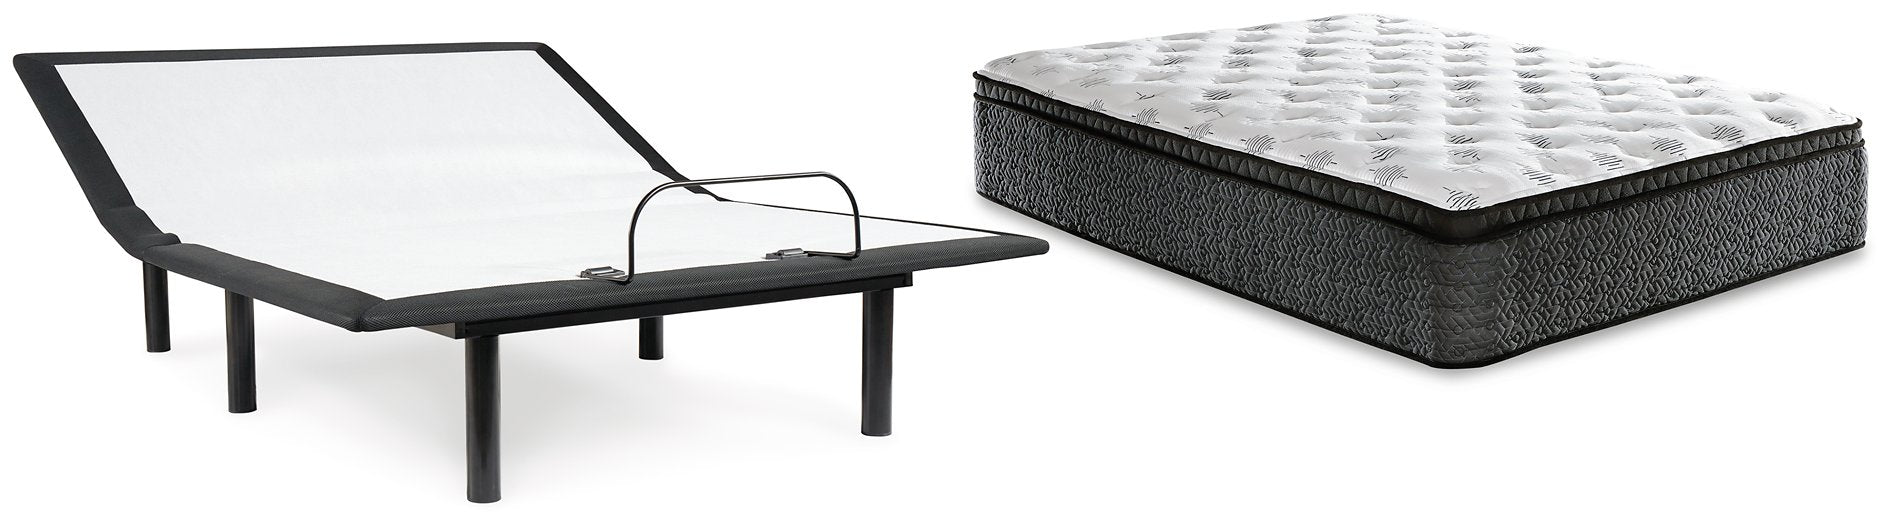 Ultra Luxury ET with Memory Foam Mattress and Base Set